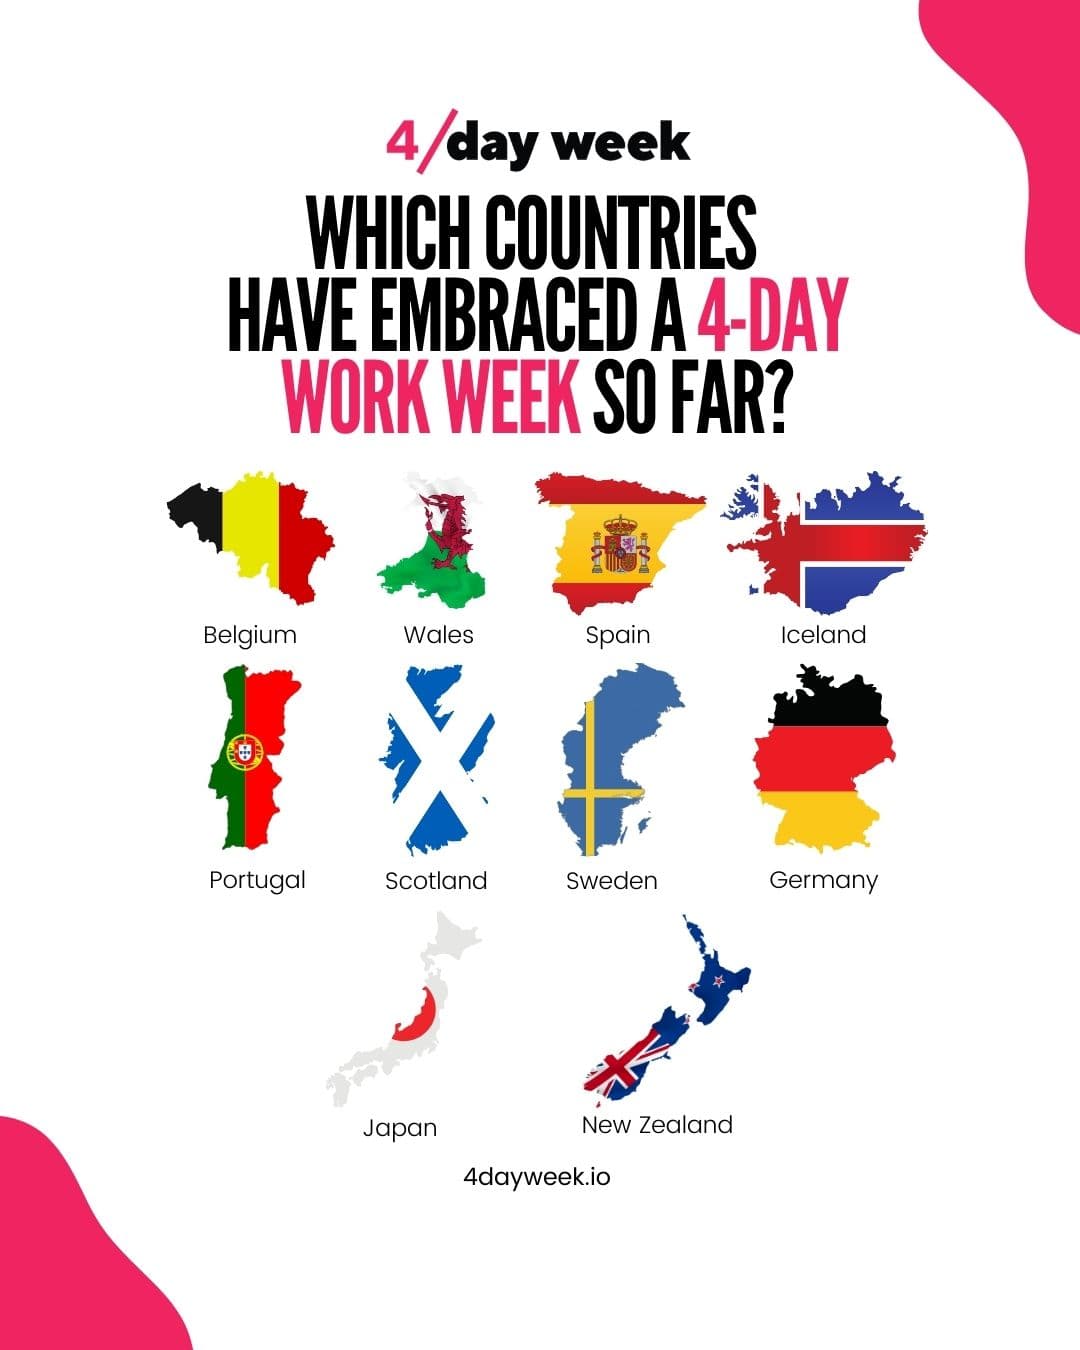  Countries That Have Embraced 4-Day Work Week
